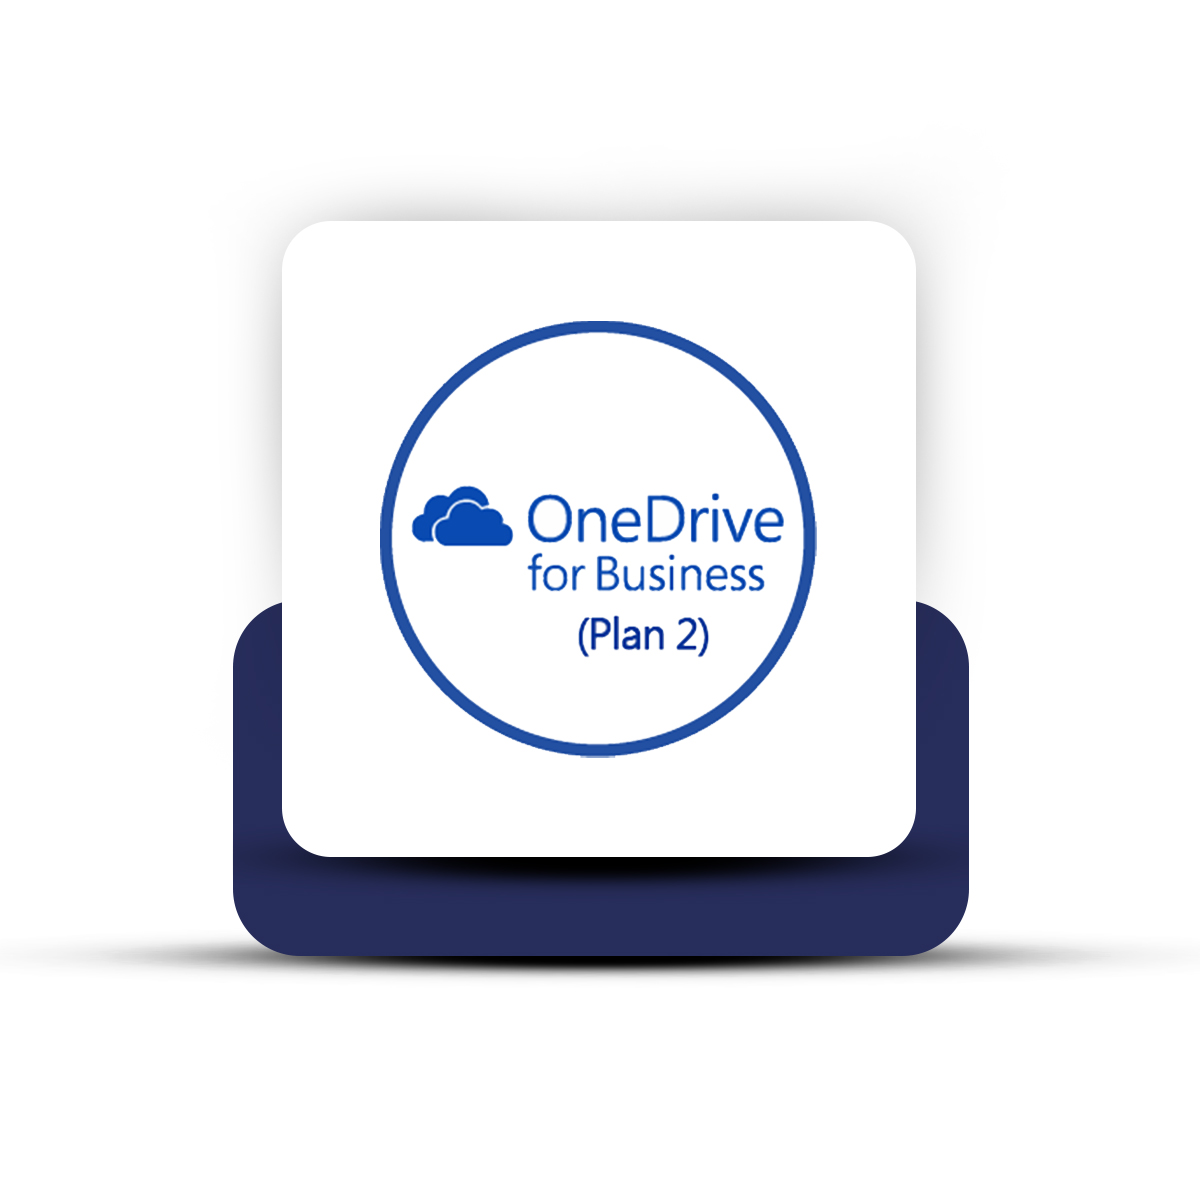 onedrive for business plan 2 microsoft